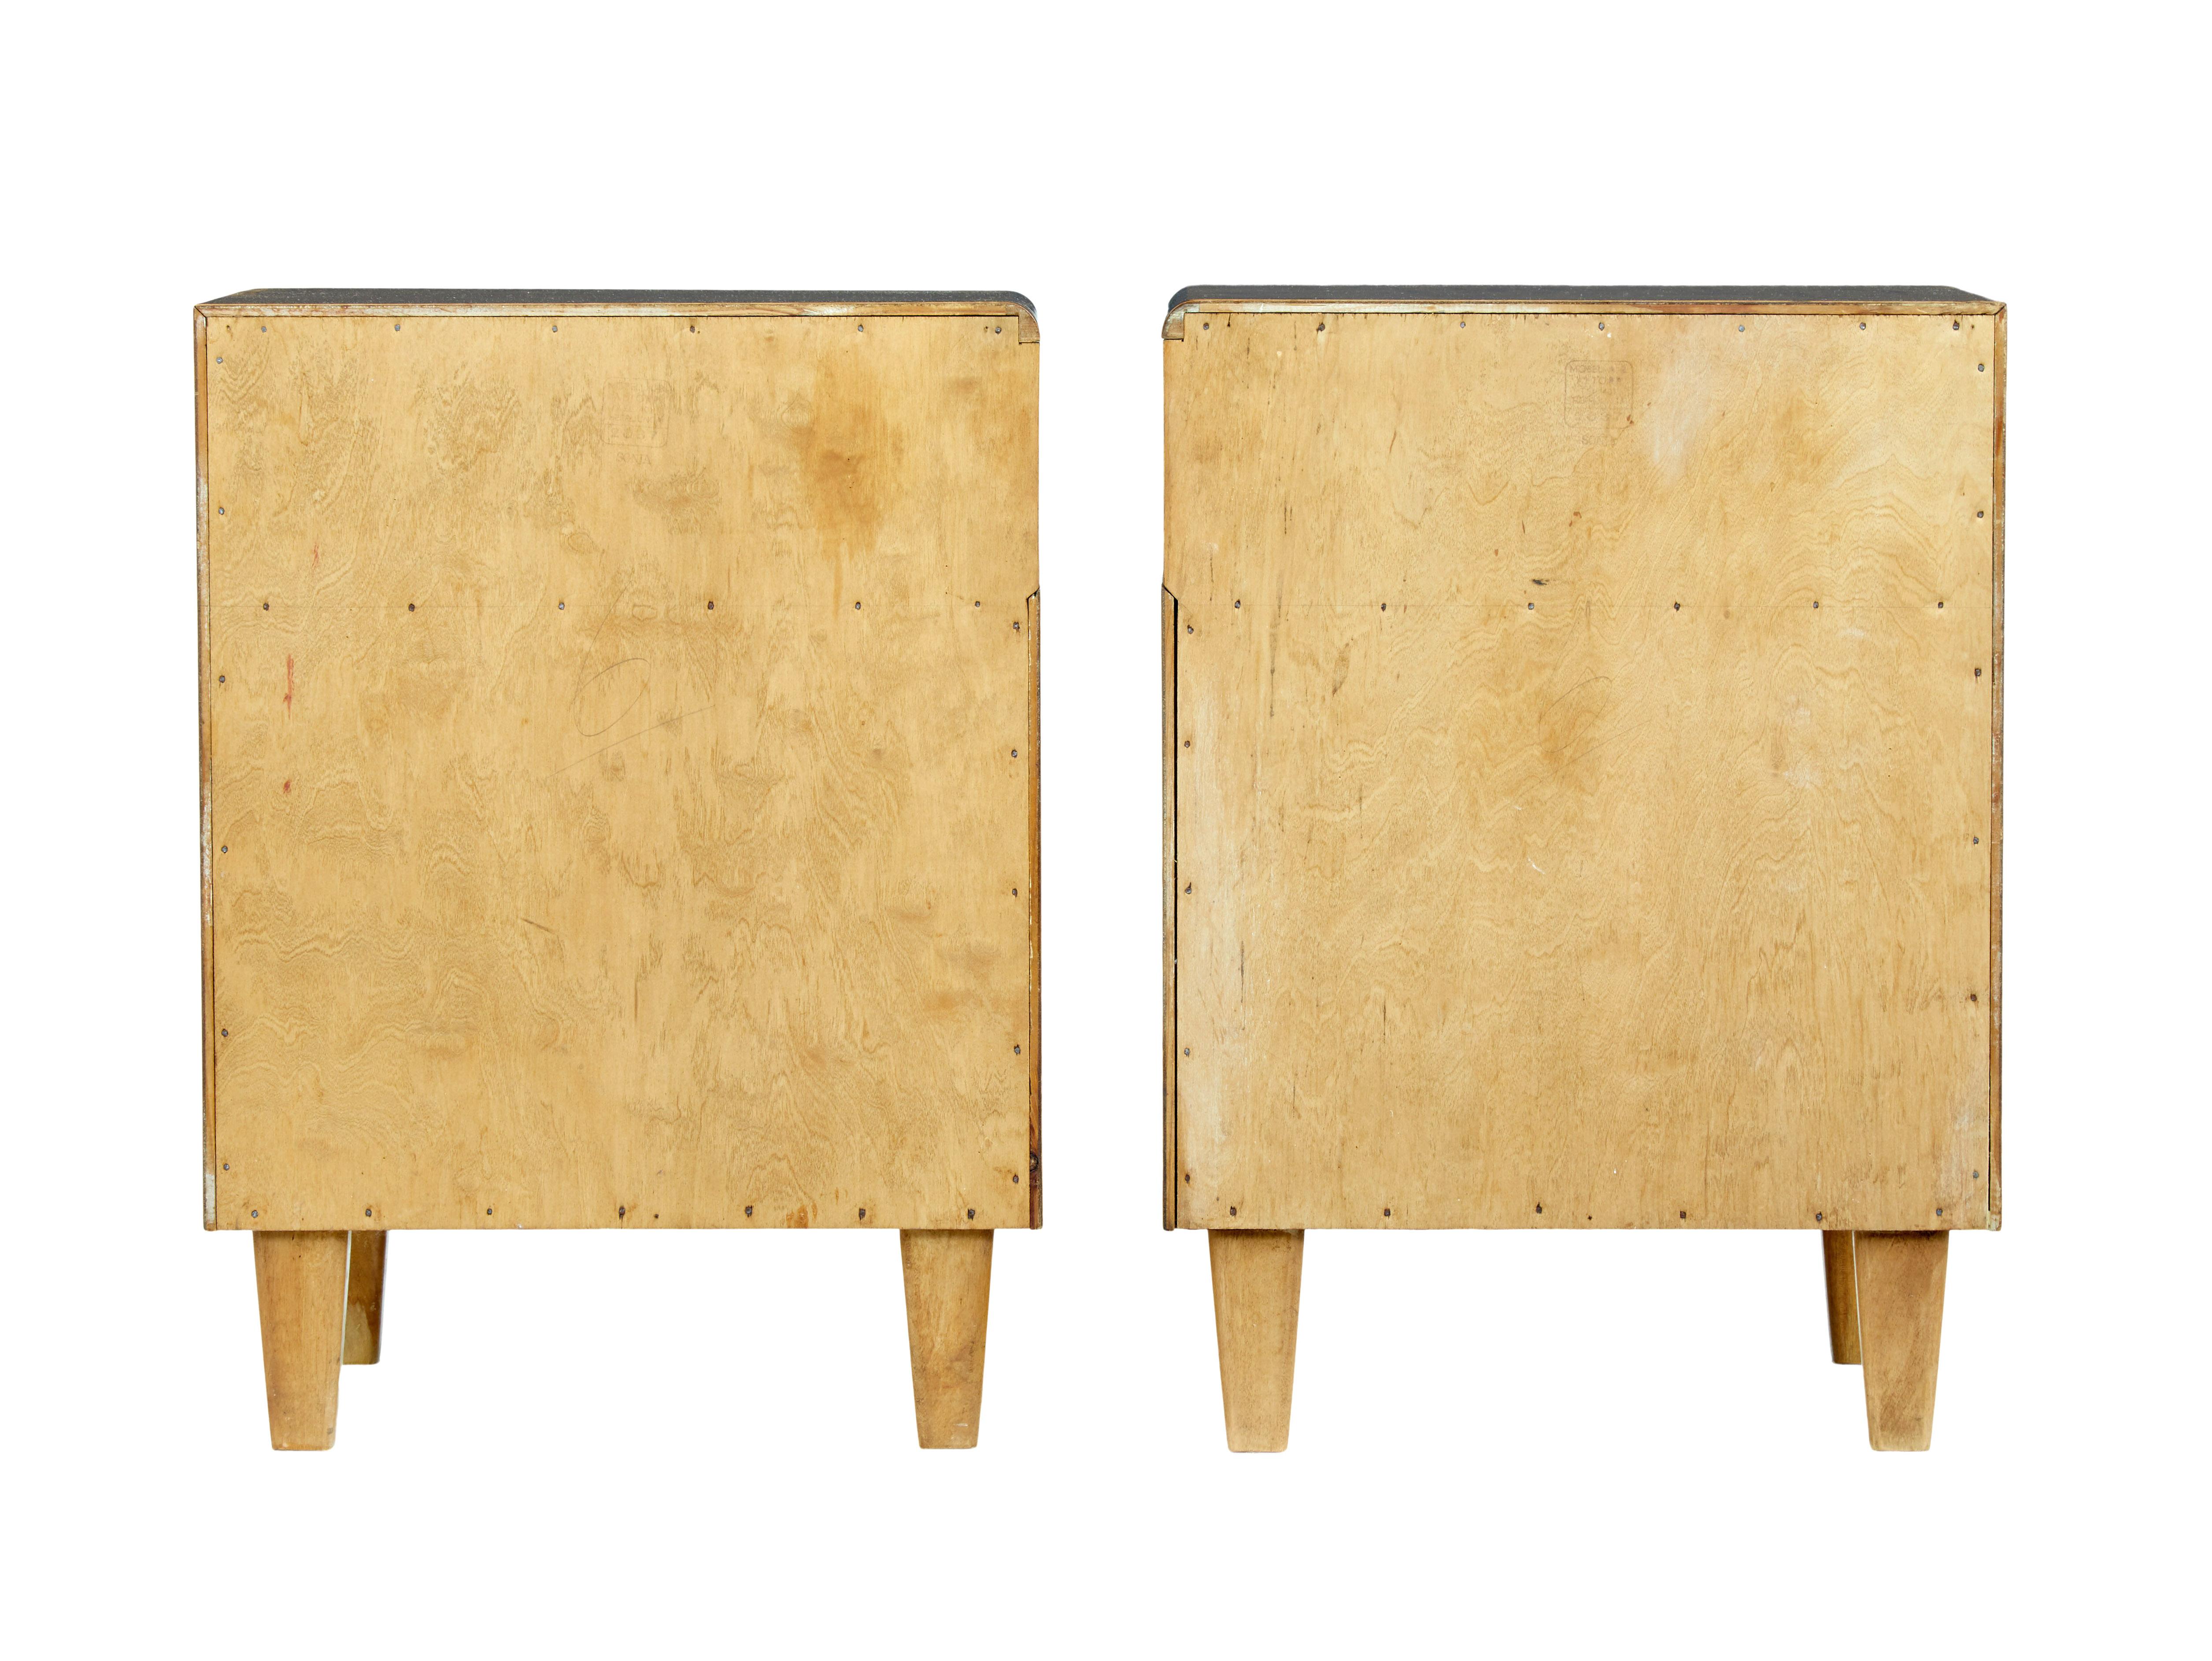 Veneer Pair of Mid-20th Century Swedish Birch Bedside Tables by Mobel AB Altorp